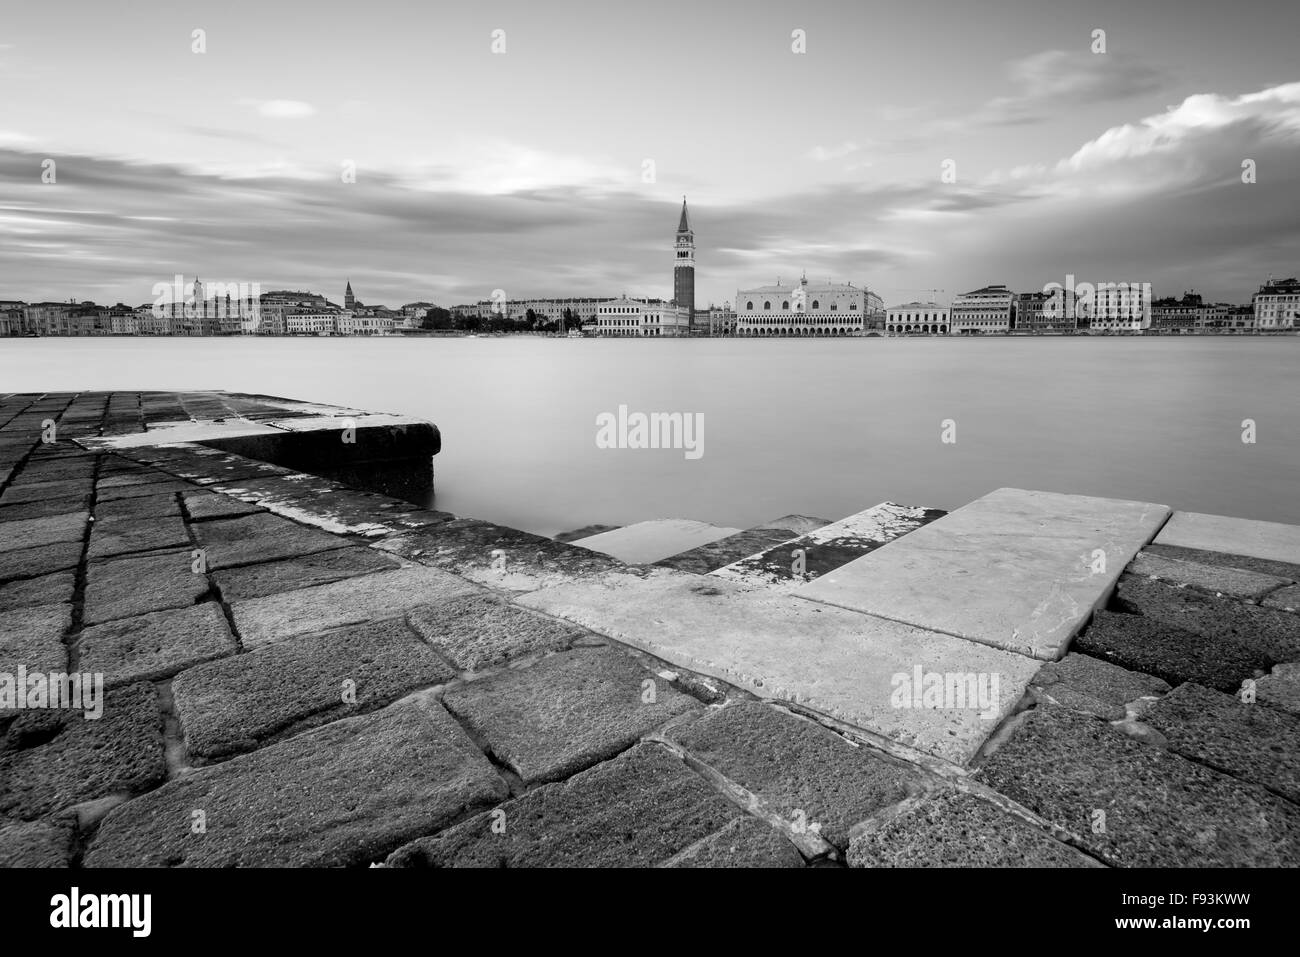 A classic black and white Venice scene; looking towards Piazza San Marco from across the lagoon at San Giorgio Maggiore. Stock Photo